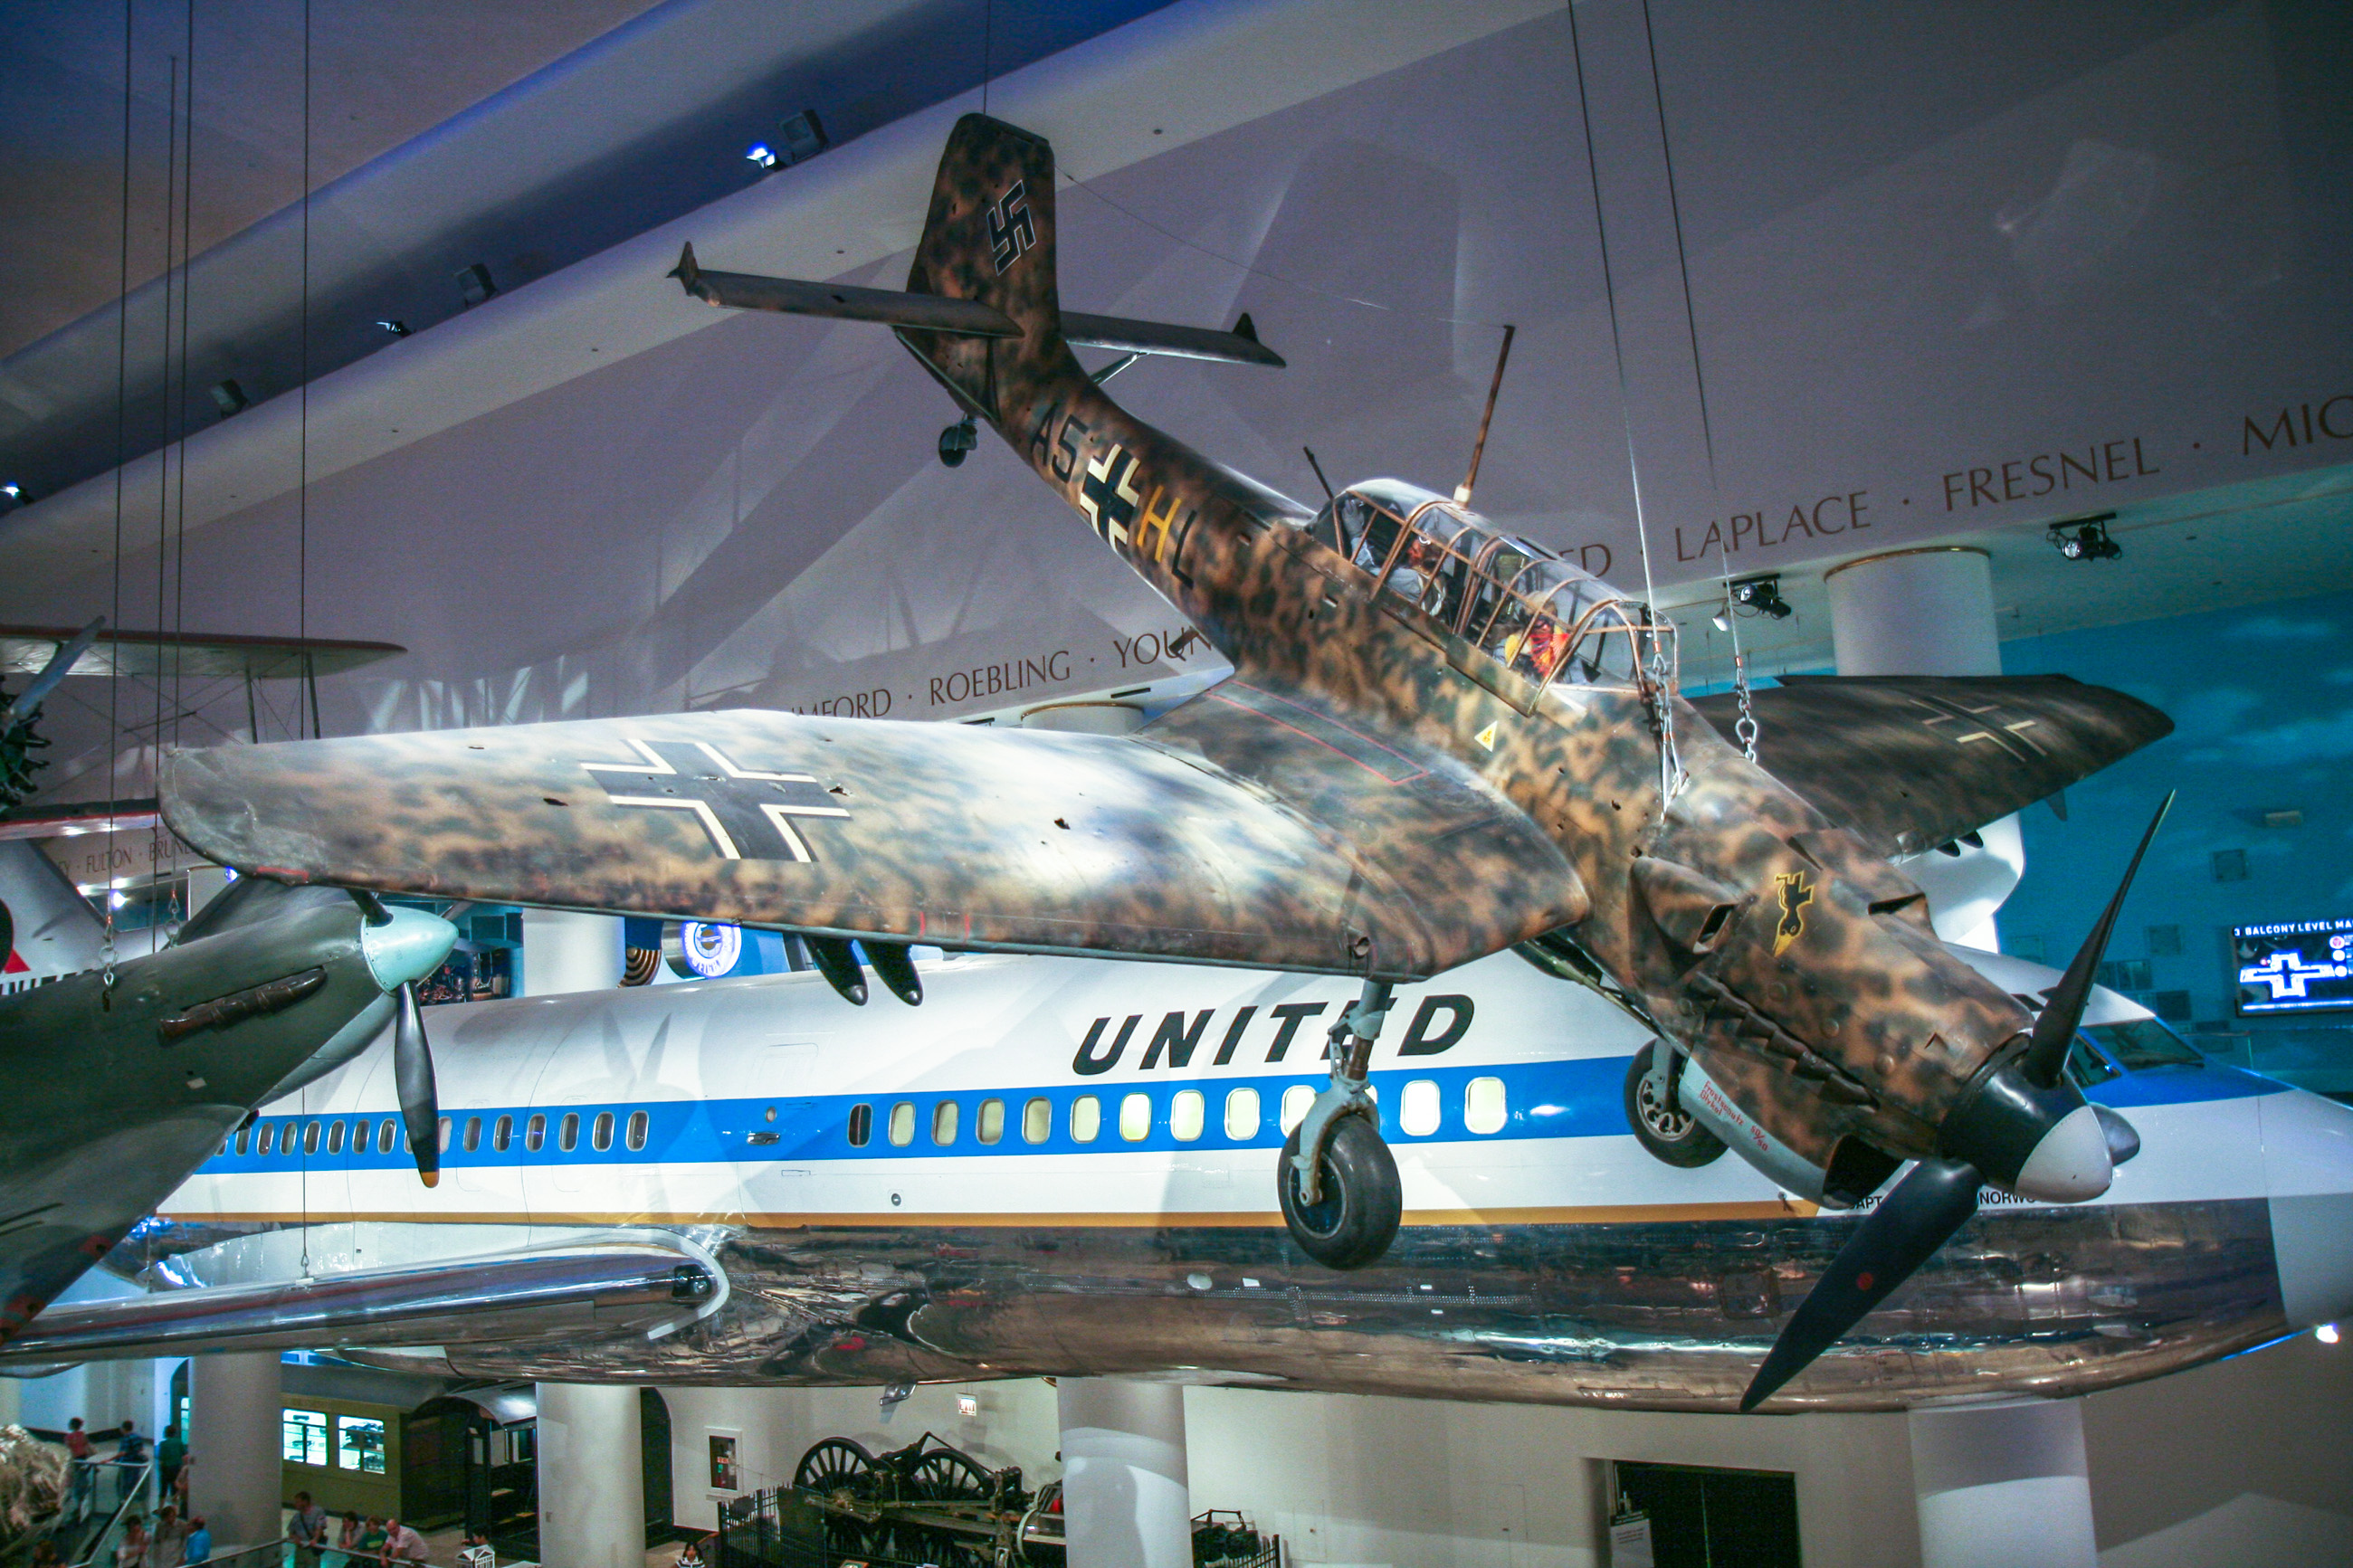 The Junkers Ju 87 on display in the Museum of Science and Industry in Chicago.(Photo Credit - William brain - CC BY-SA 3.0)